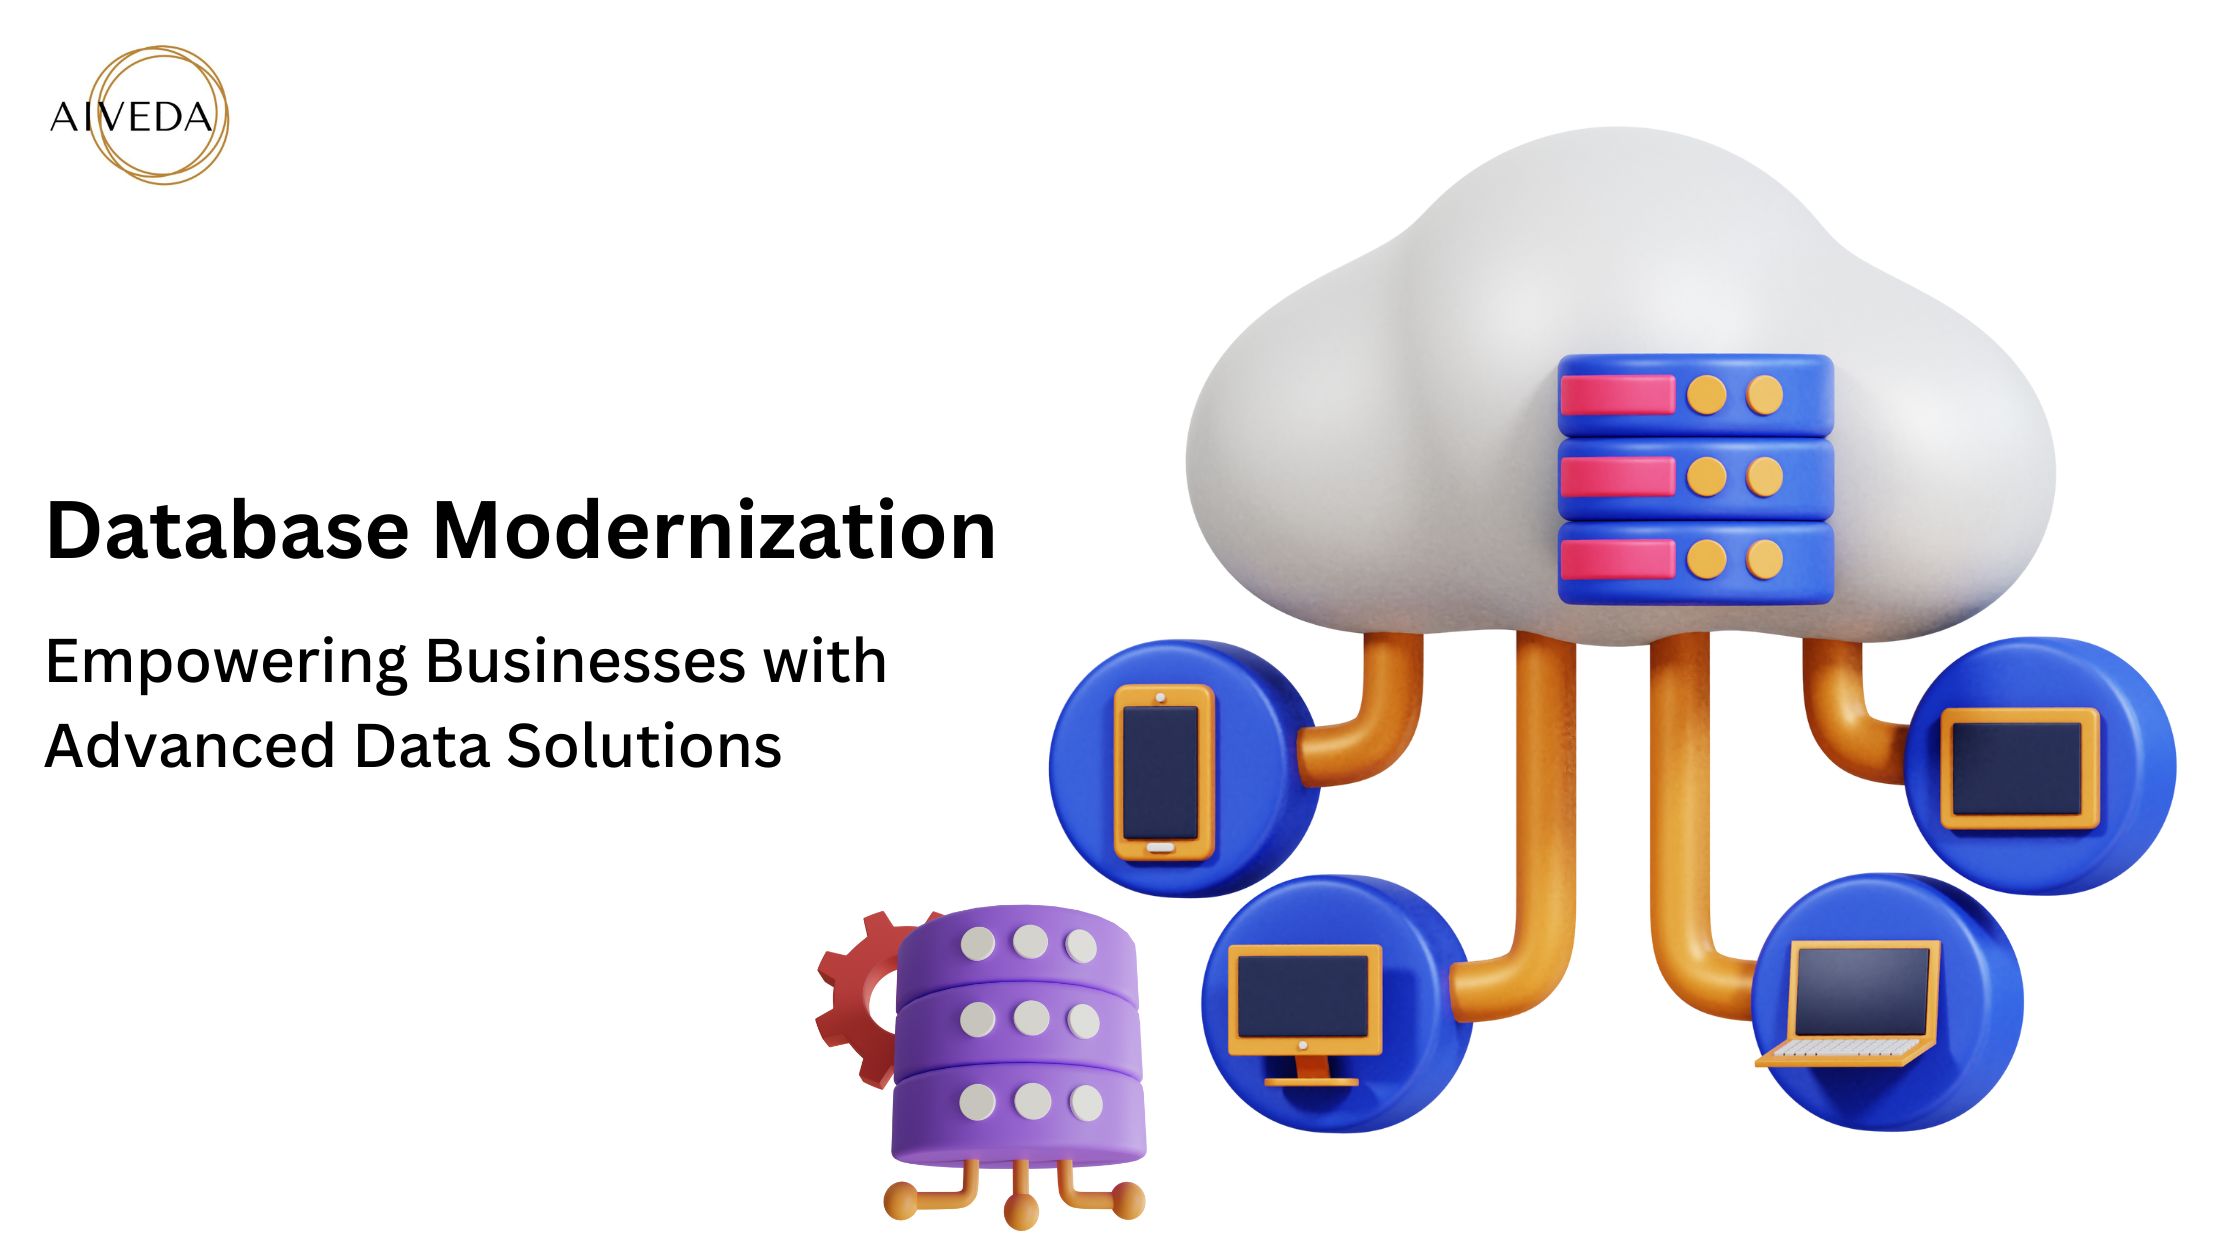 Database Modernization: Empowering Businesses with Advanced Data Solutions